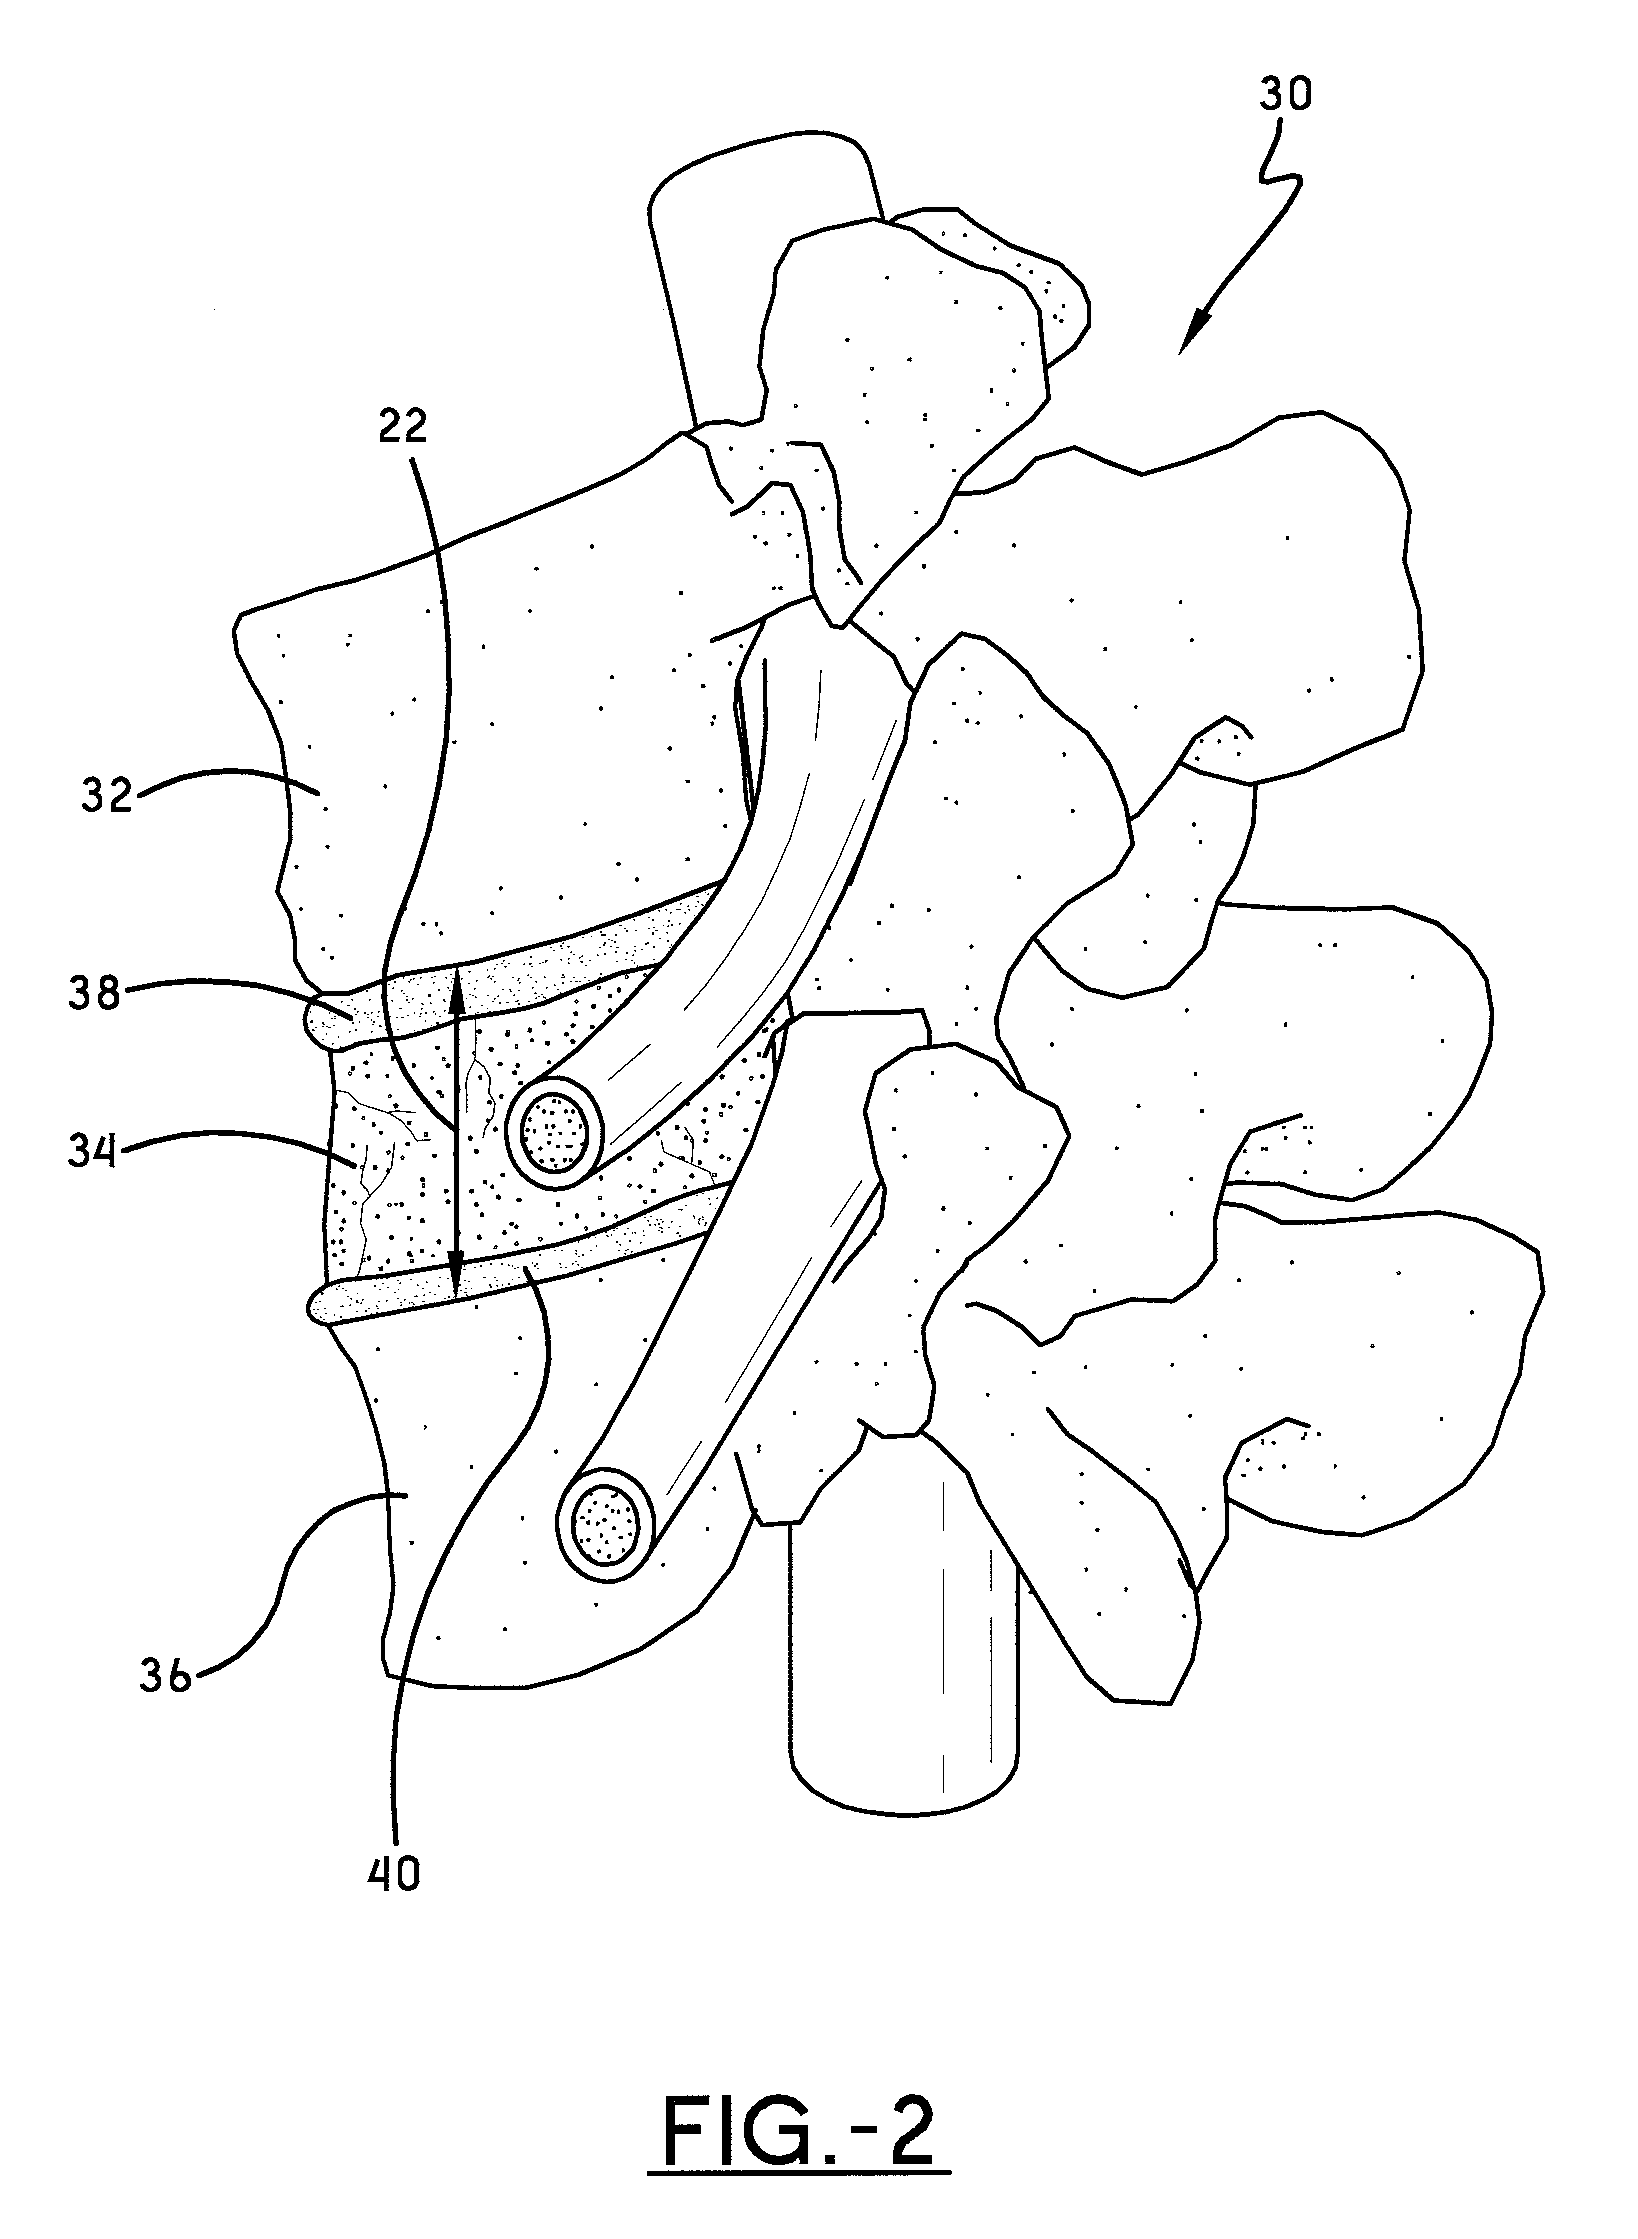 Spine surgery method and extractor